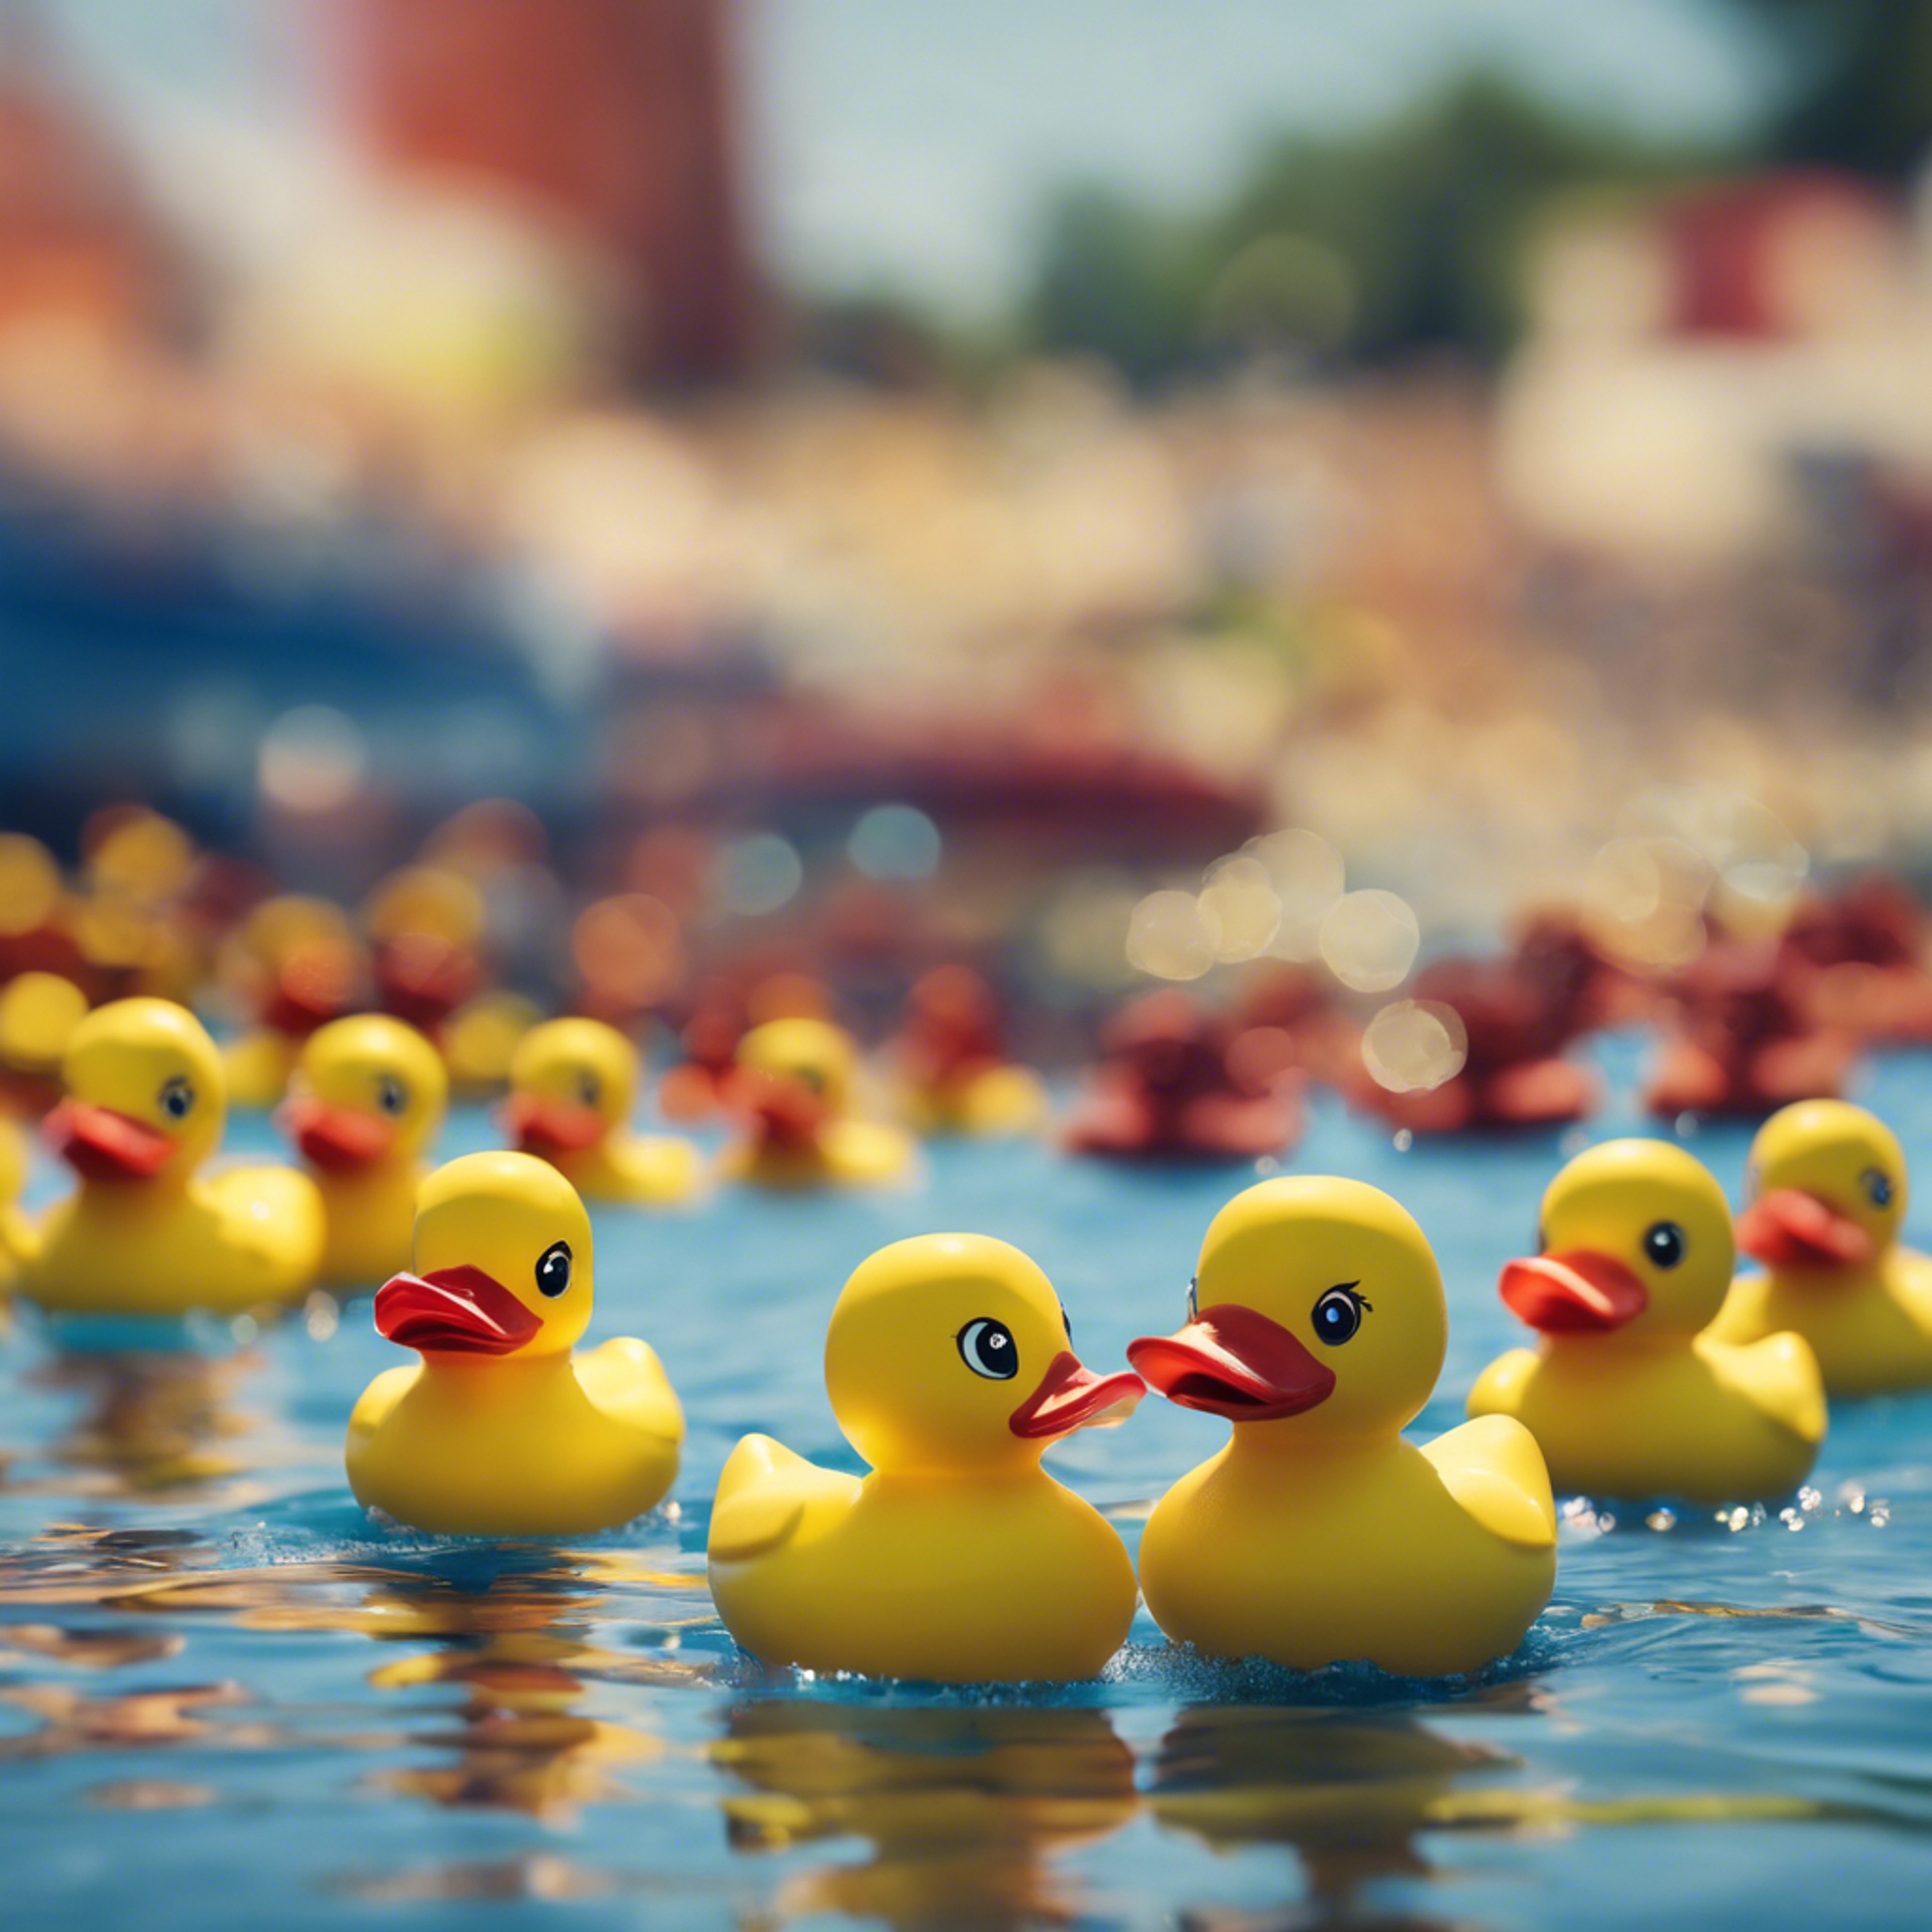 A team of vibrant rubber ducks lined up for a fun bath-time race. Hintergrund[f8bfe643527940e89331]